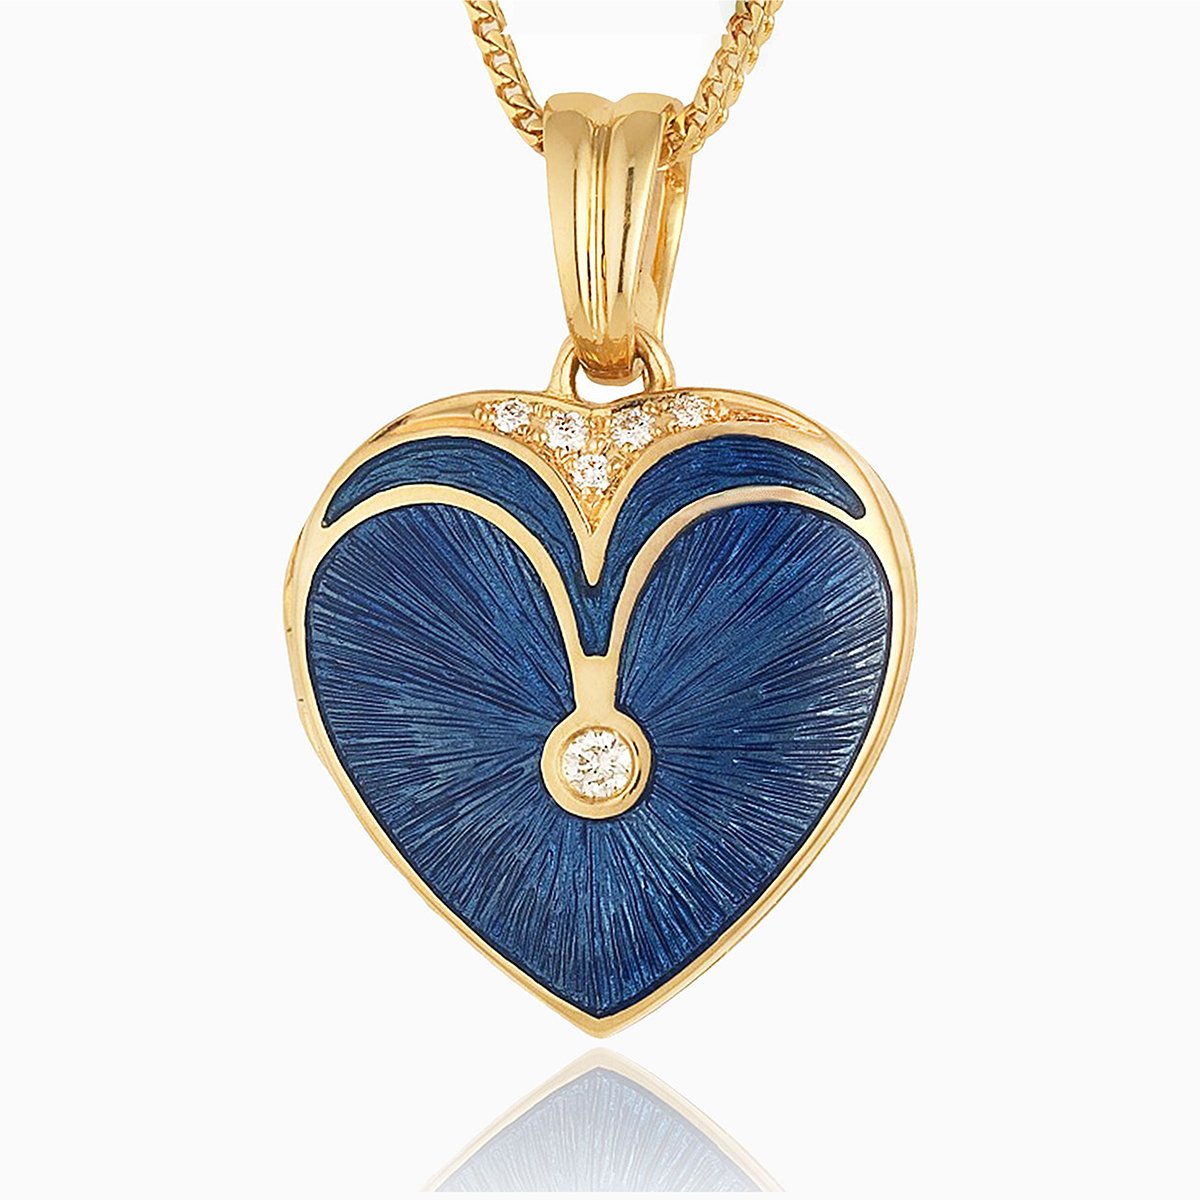 18 ct gold heart locket set with blue guilloche enamel and diamonds on an 18 ct gold franco chain